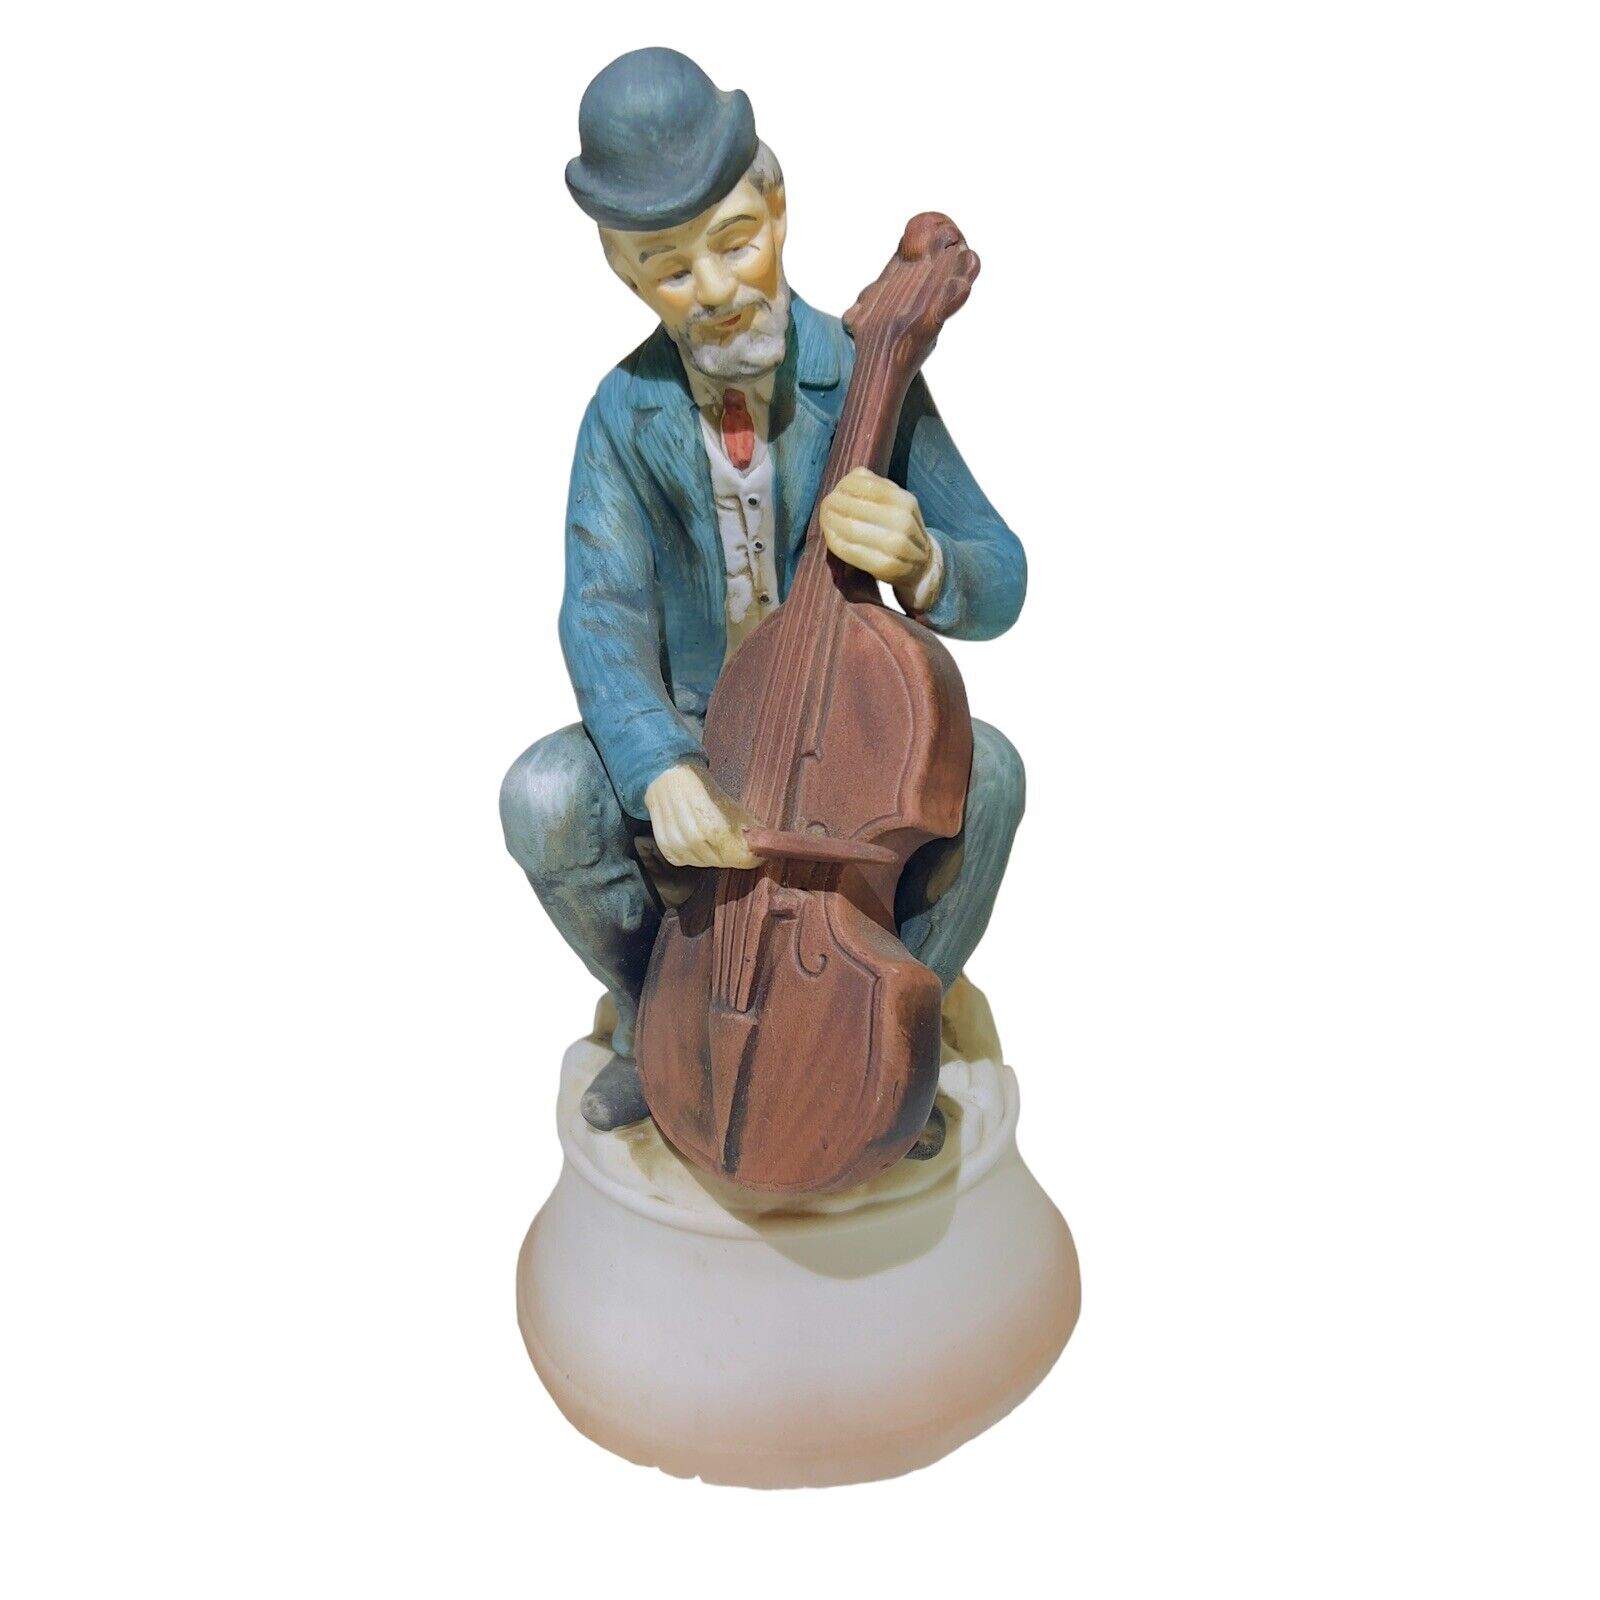 Vintage Shafford Japan Music Box Man With Cello 8” Figurine Song Unknown Japan